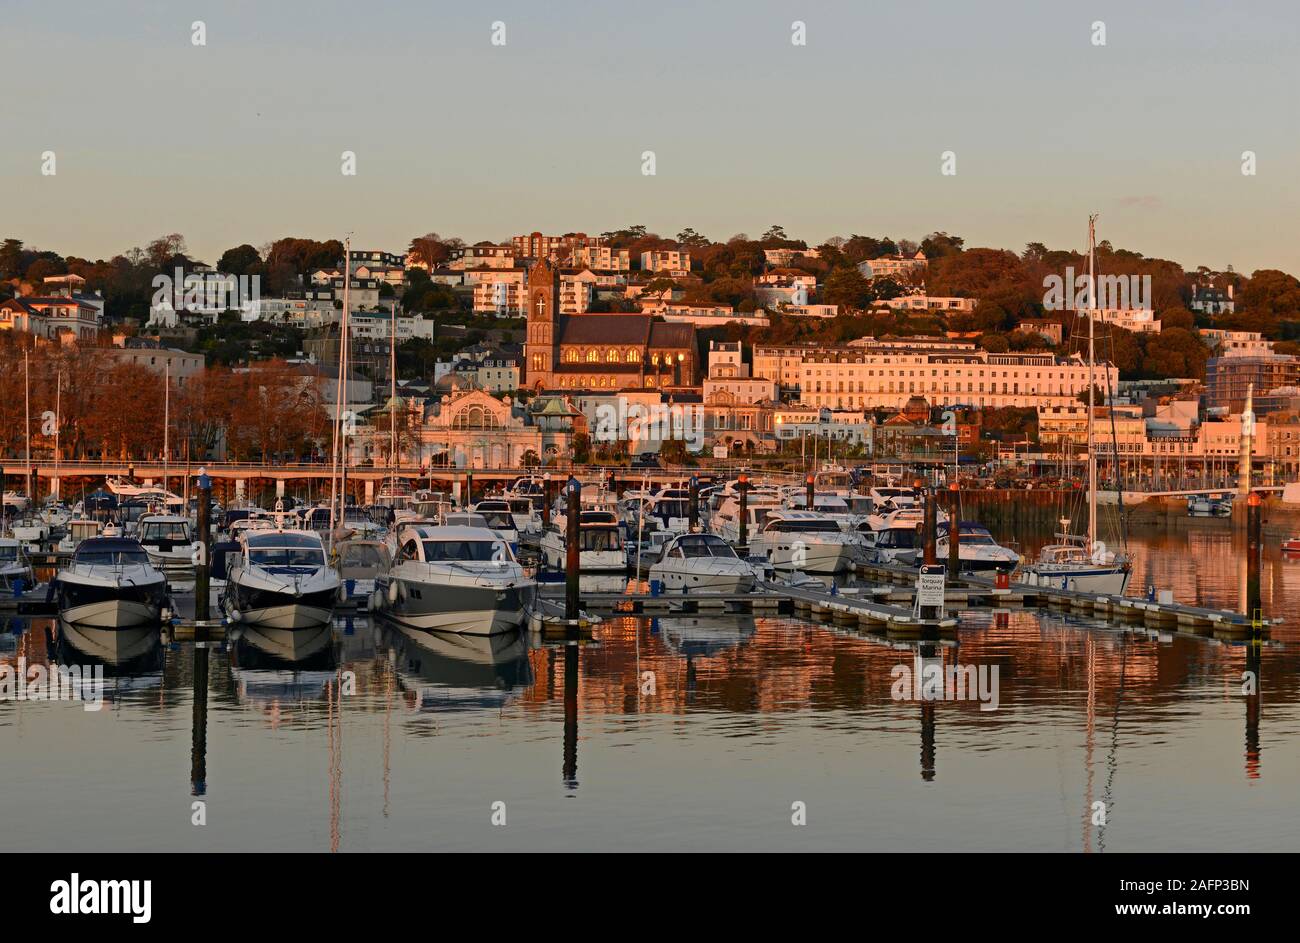 Yachts and other boats moored in the marina at Torquay, Devon, UK, as the sun sets, illuminating the town behind with orange light. Stock Photo